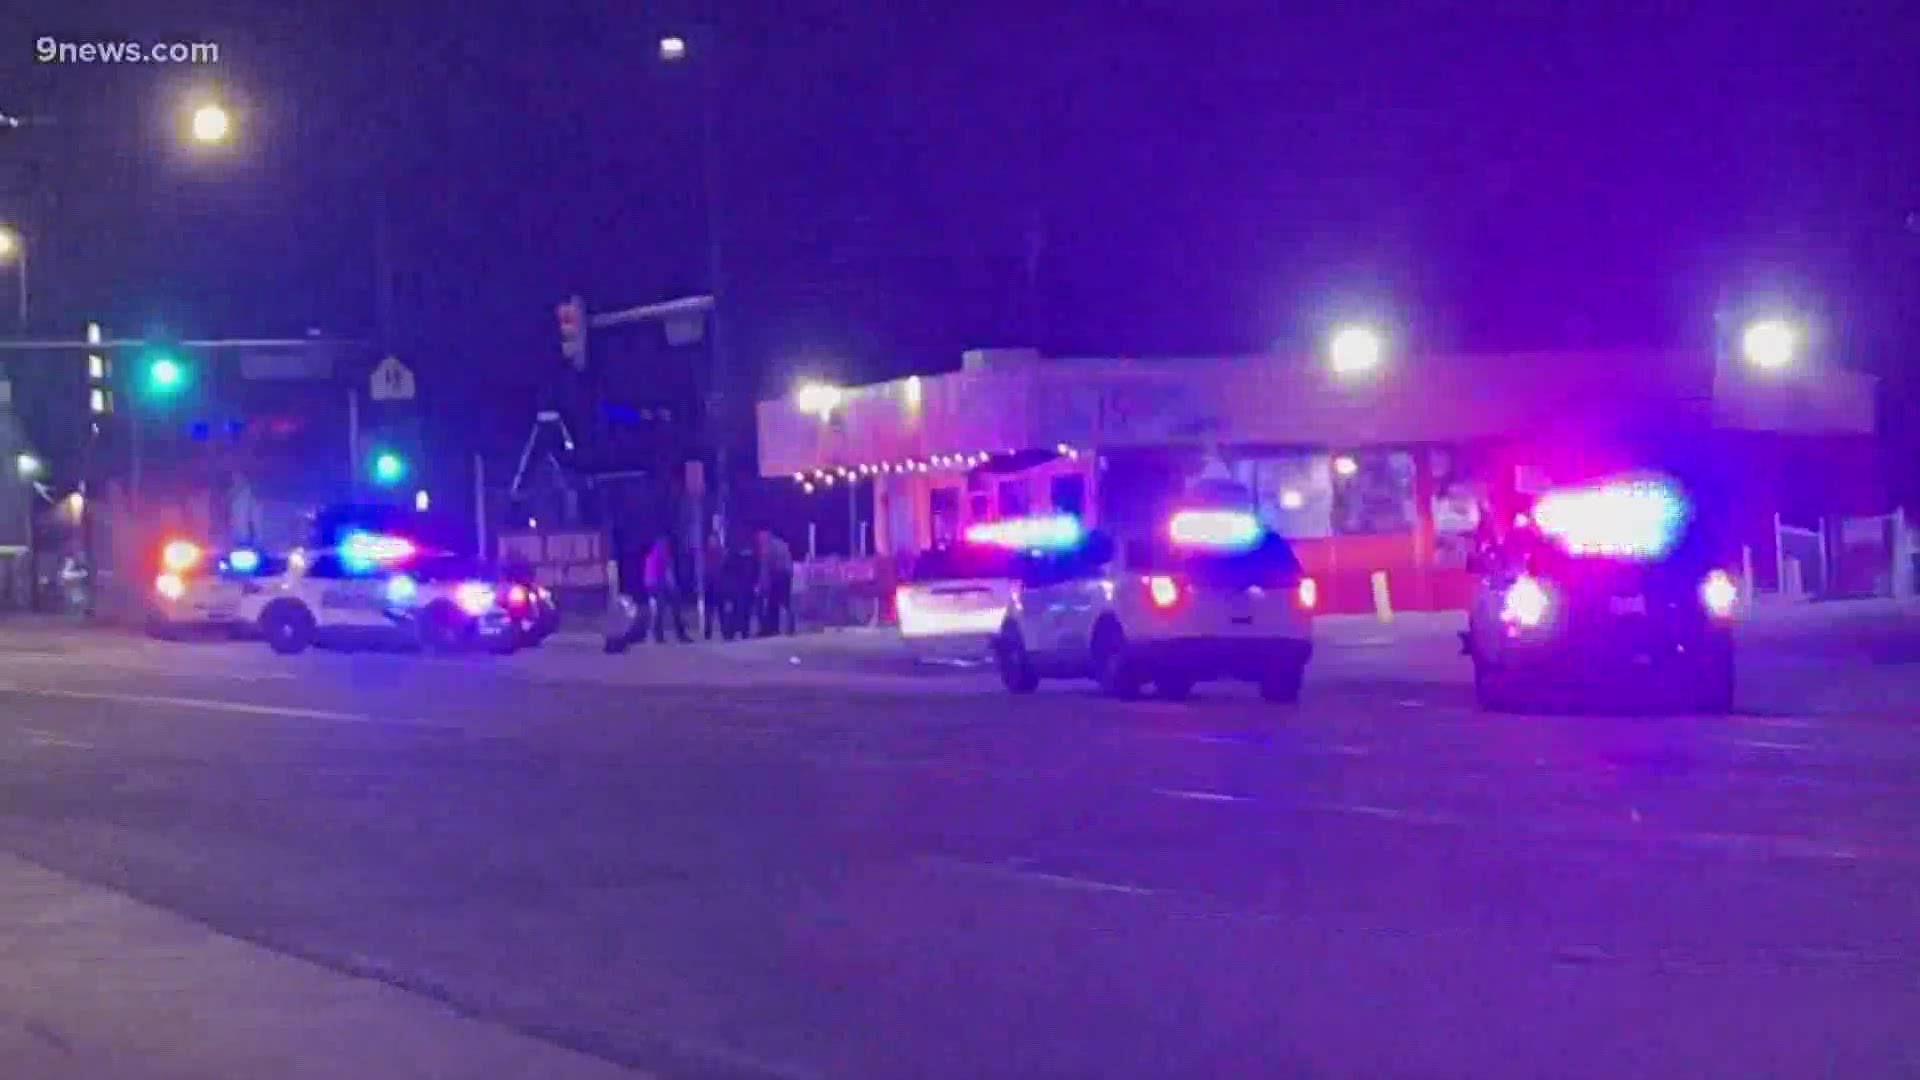 Police said officers shot and killed an armed man who fled from a traffic stop in Adams County, led a pursuit into Denver and fired shots at deputies.